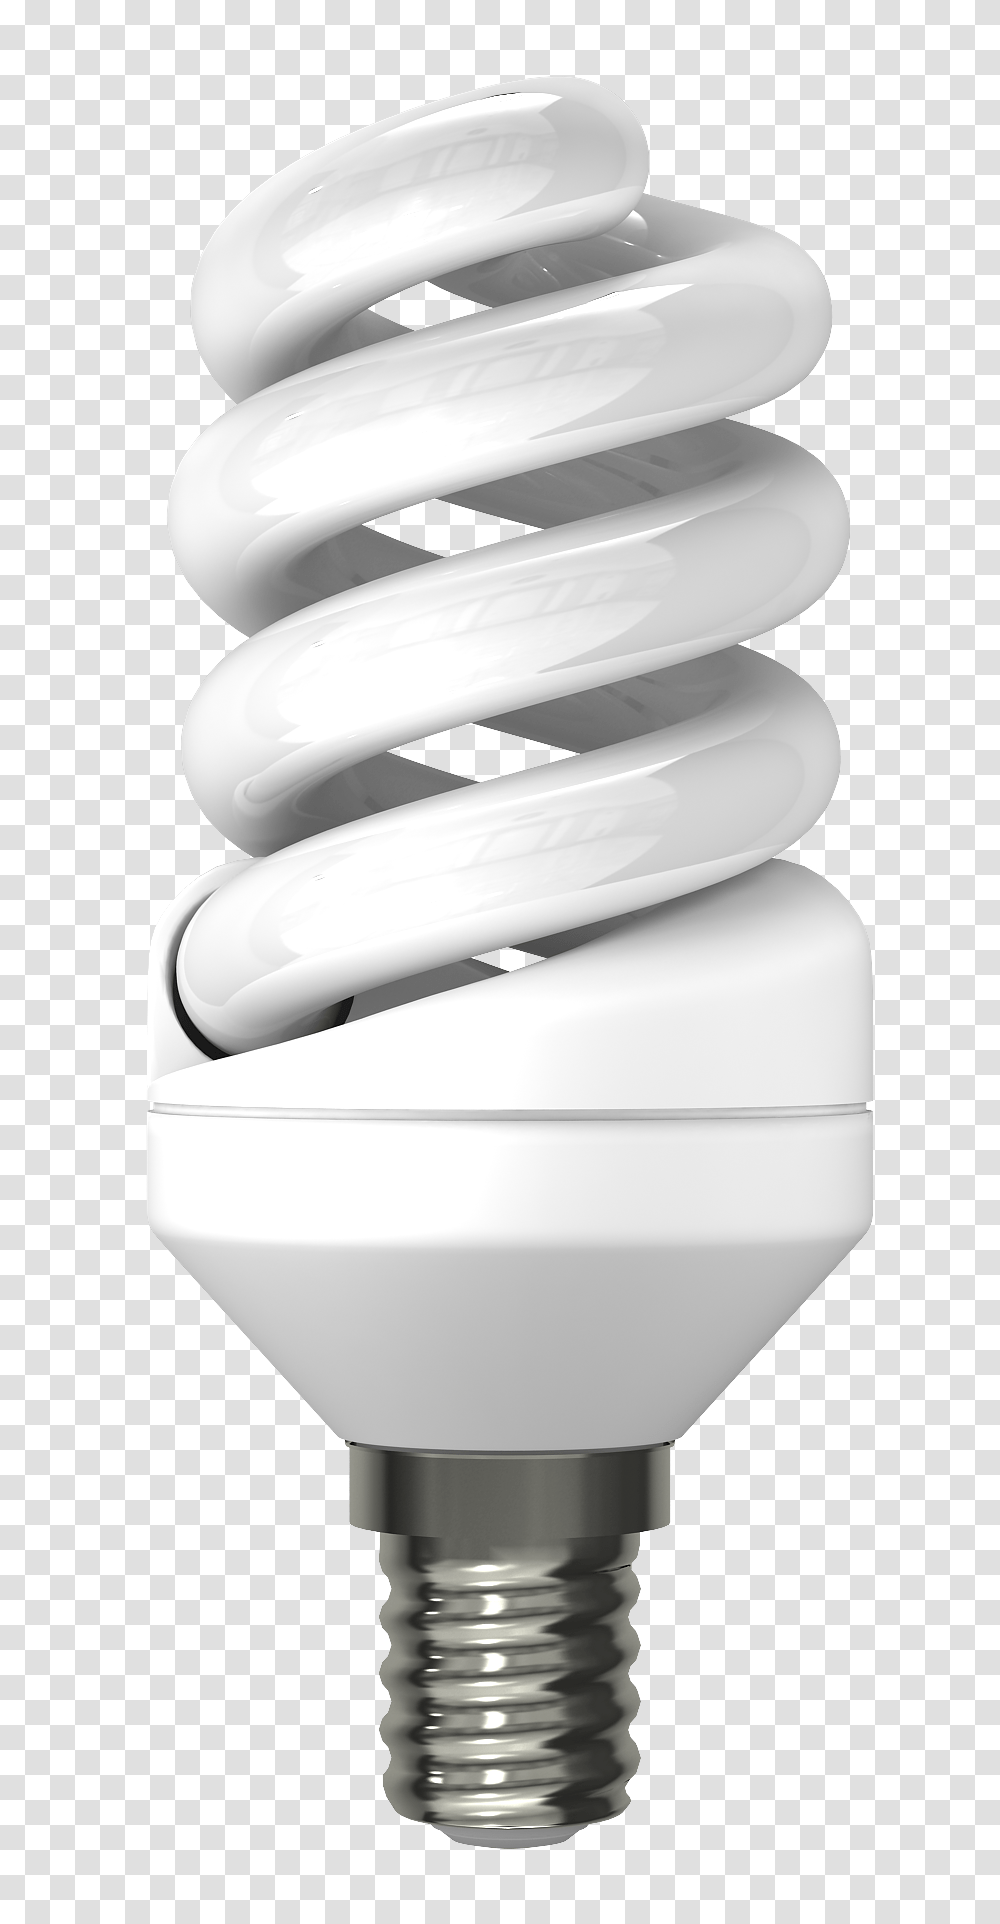 Lamp Free Download 2 Black And White Incandescent Light Clipart, Coil, Spiral, Ring, Jewelry Transparent Png